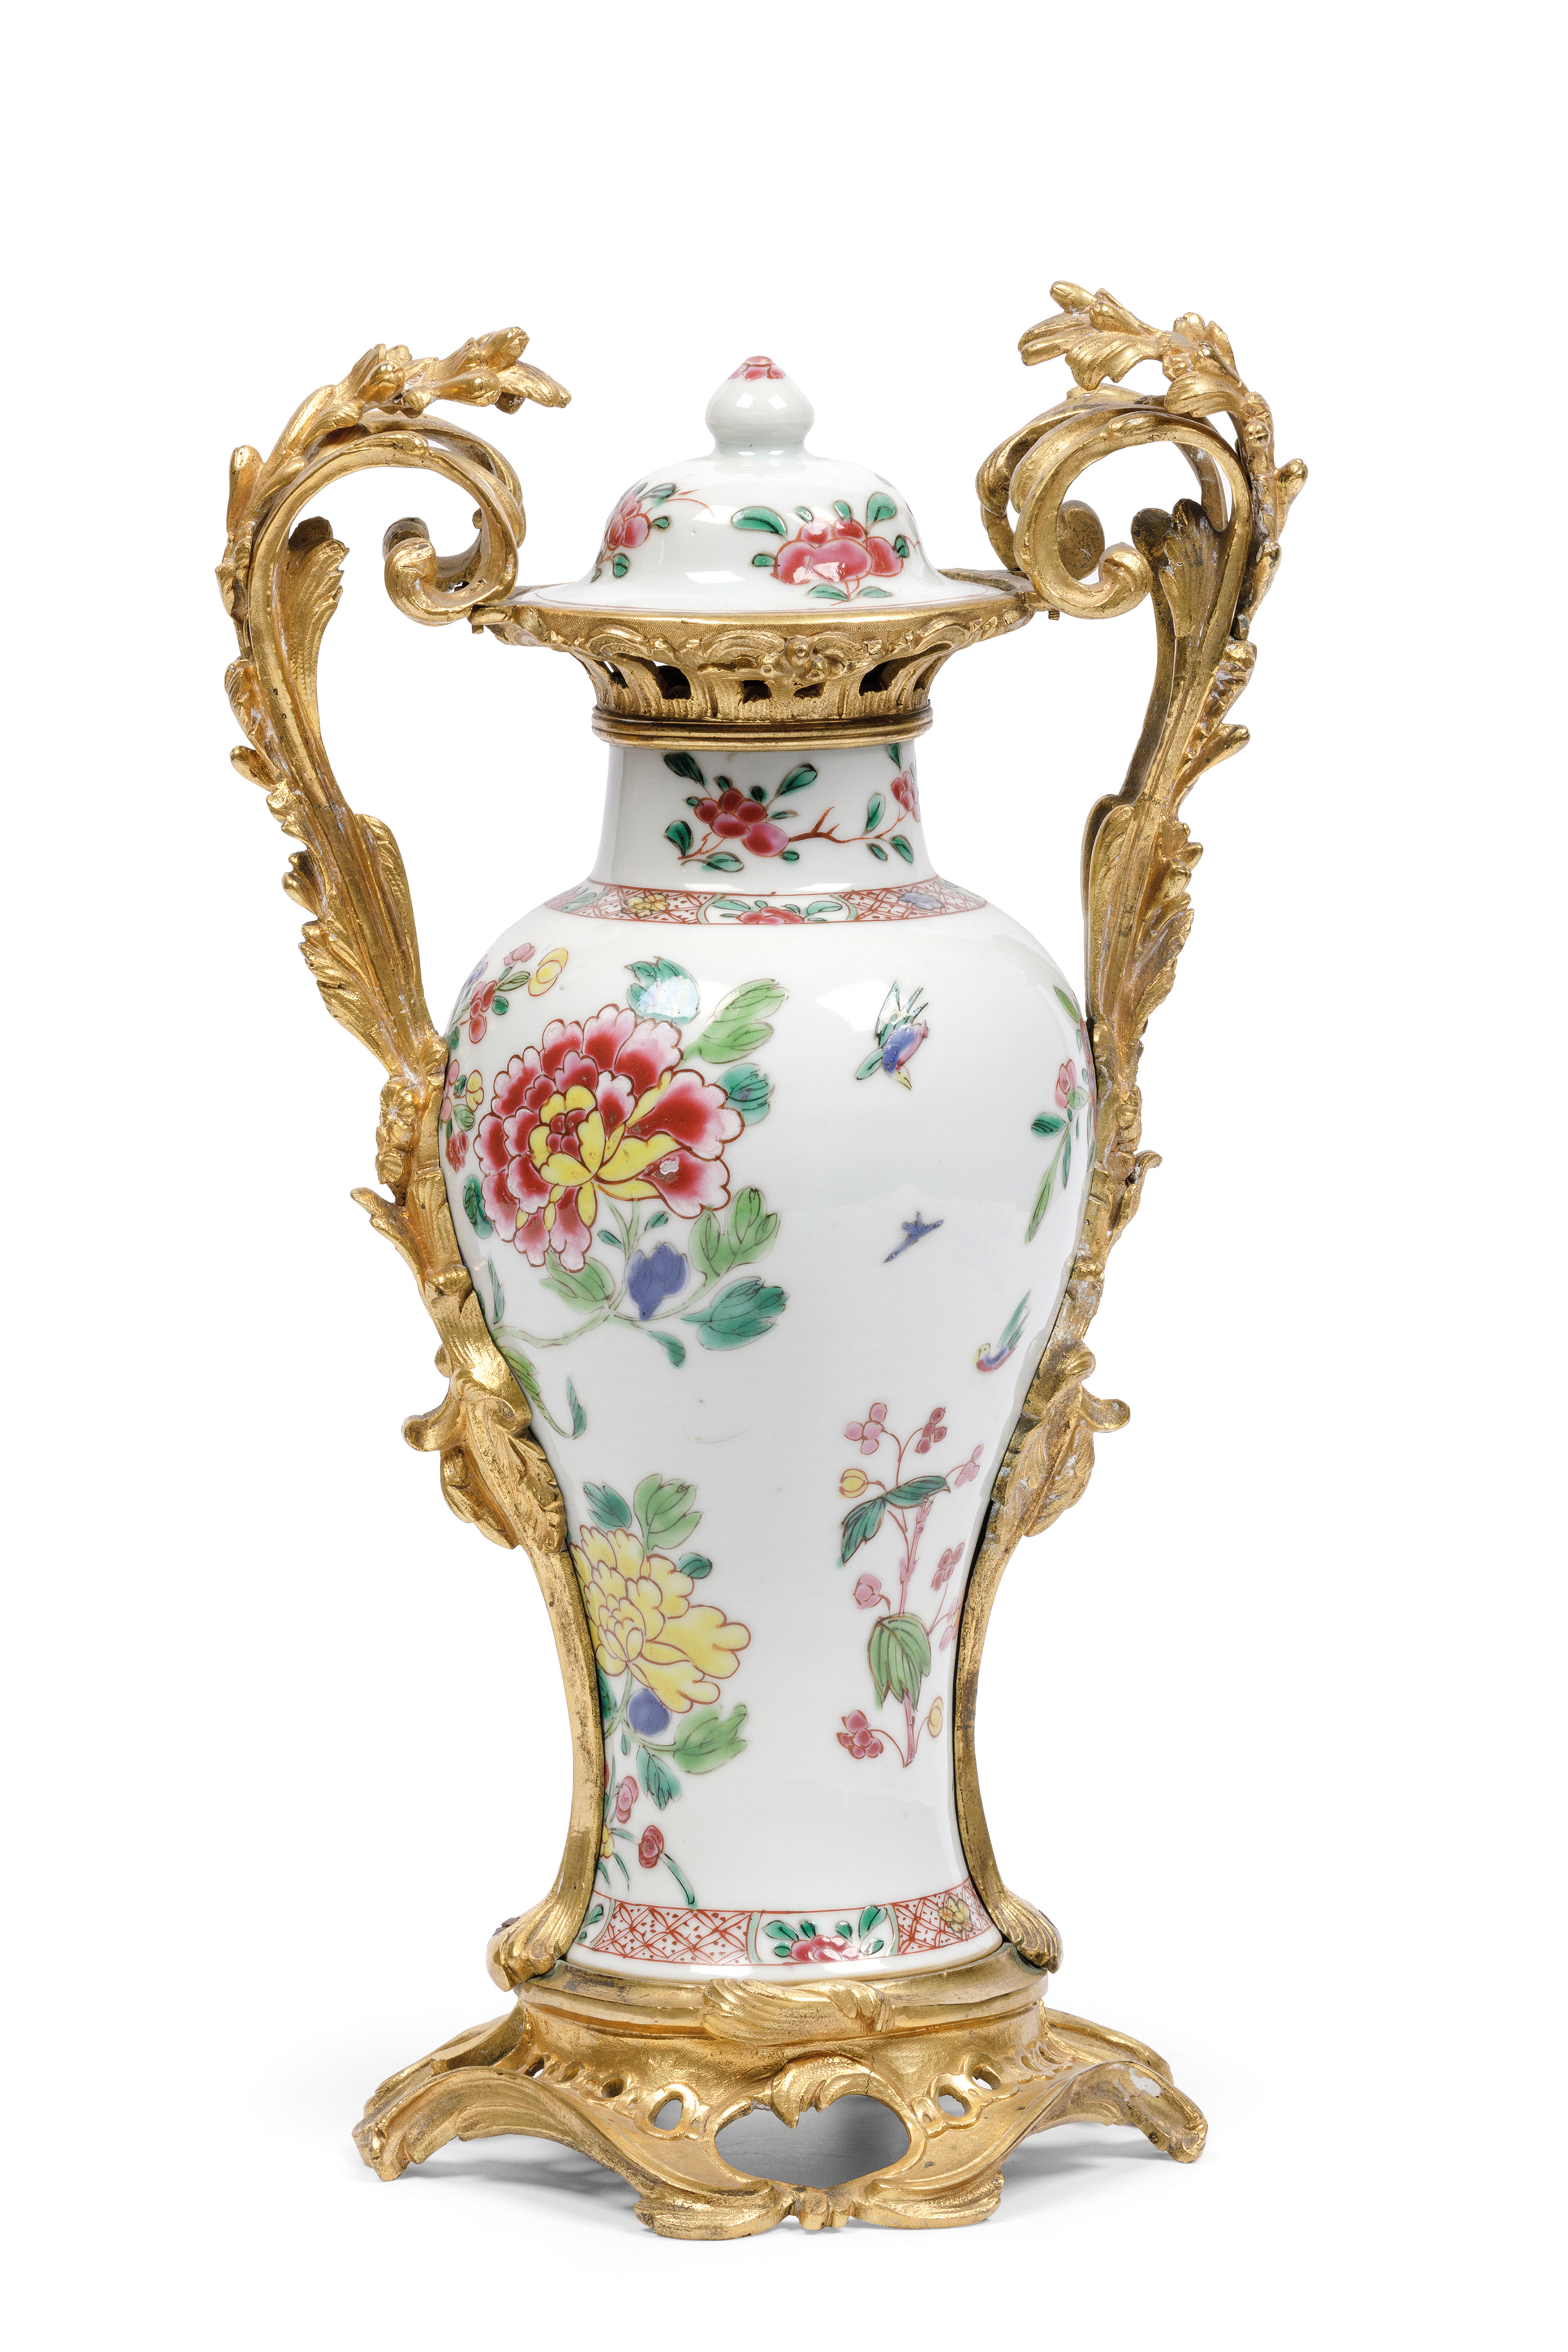 AN ORMOLU-MOUNTED FAMILLE ROSE PORCELAIN POTICHE AND COVER, CHINA, 18TH CENTURY, THE EUROPEAN MOUNT - Image 4 of 4